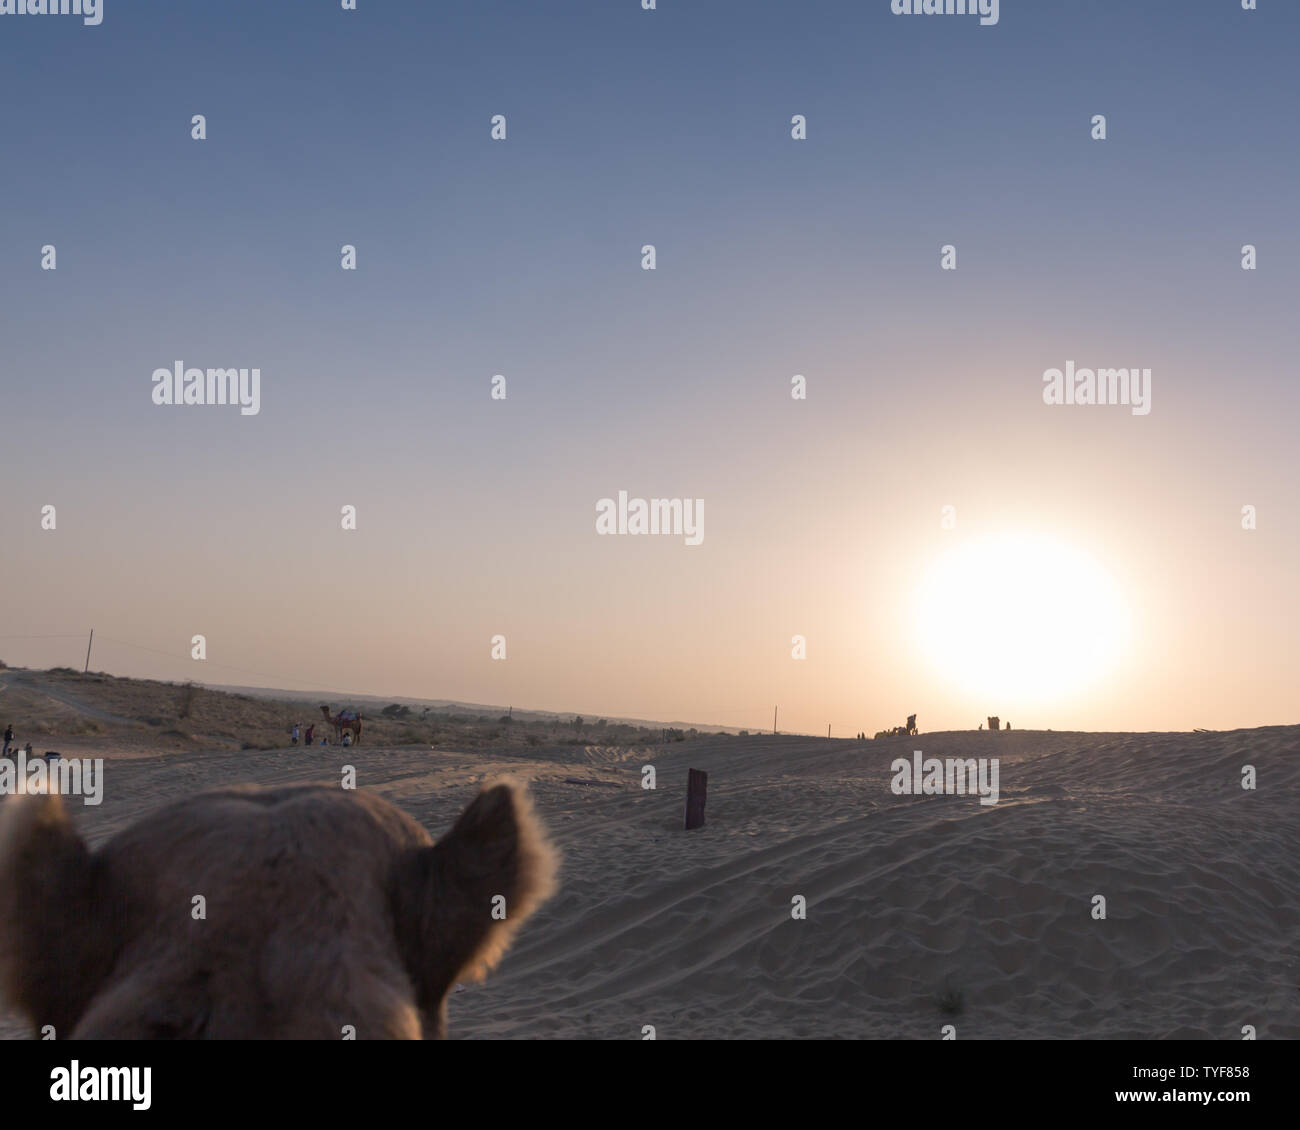 Camel ears while on camel ride in Rajasthan desert with sunset in background Stock Photo